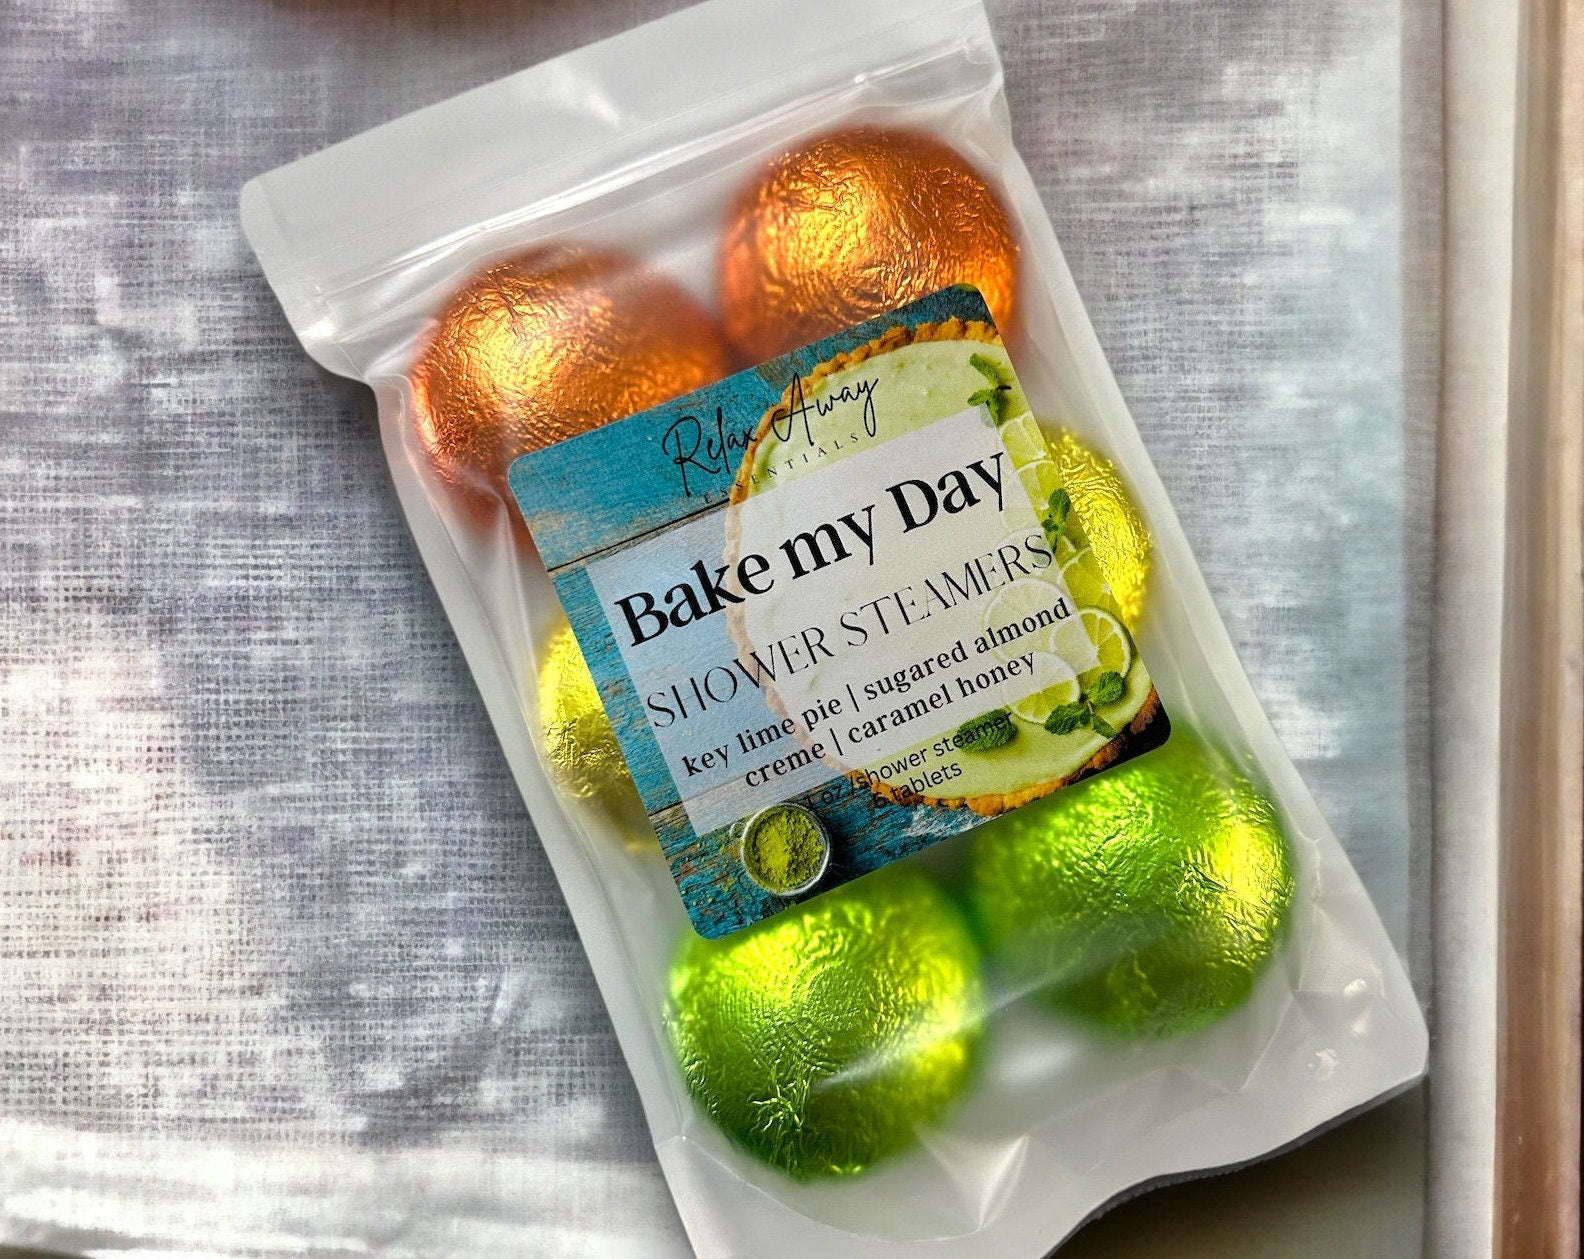 Bake My Day Shower Steamers 6 Pack | Key Lime Pie | Caramel Honey | Sugared Almond Creme | Spa Gift | Bakery Scent |